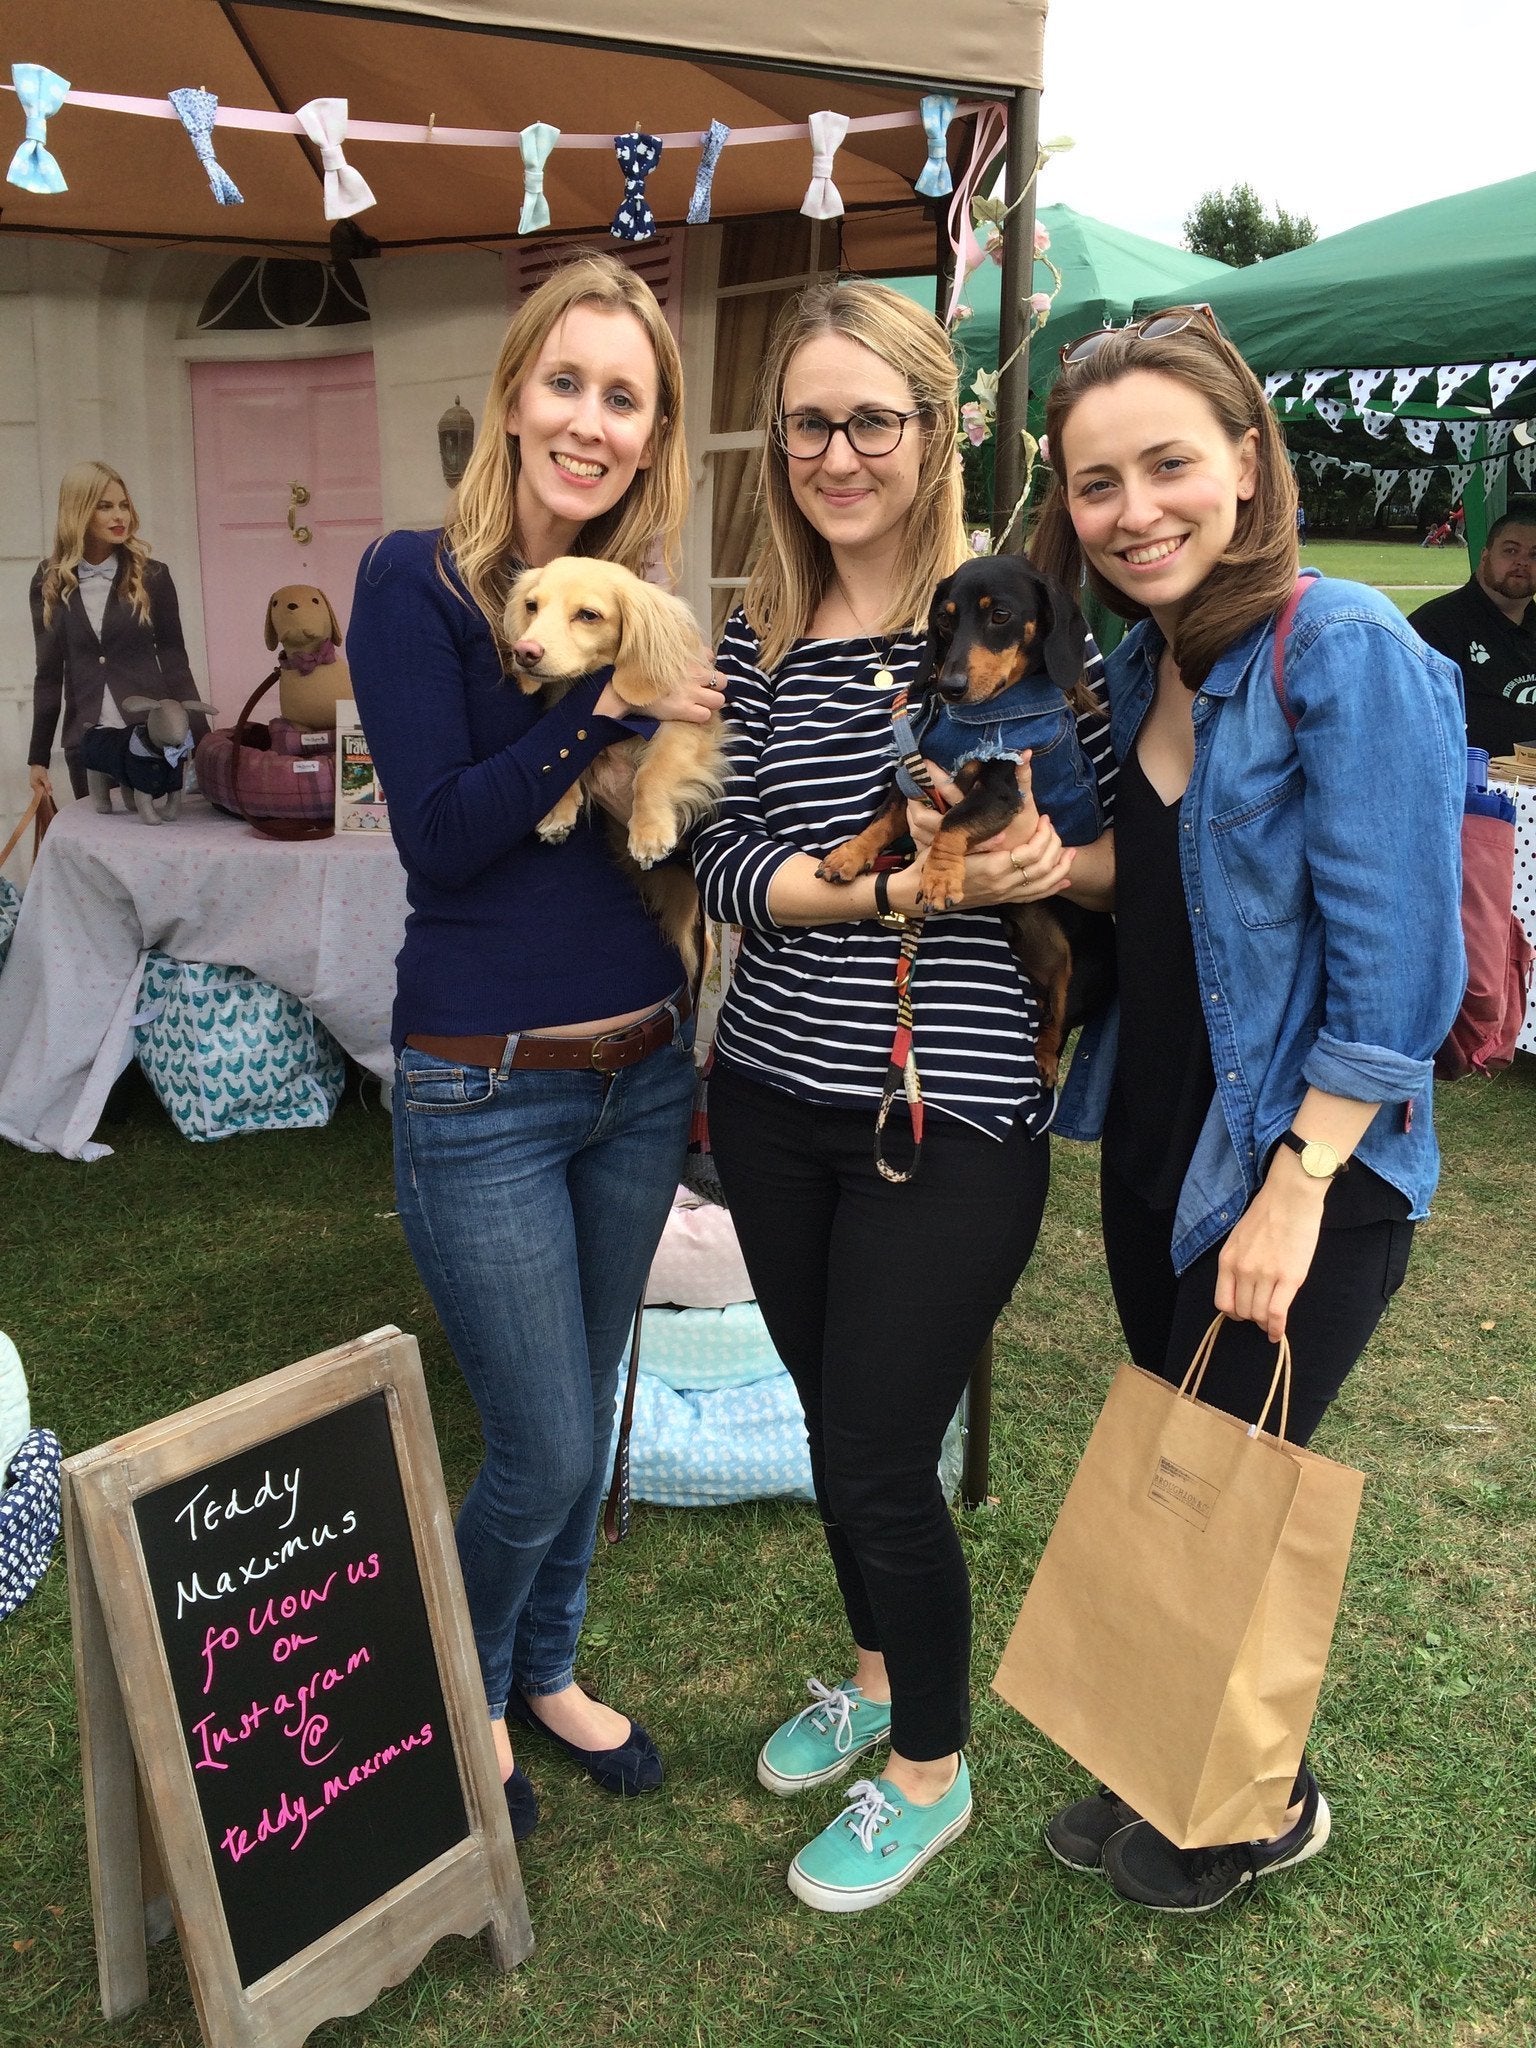 Pop-Up at PupAid in Primrose Hill (that's a lot of P's!)